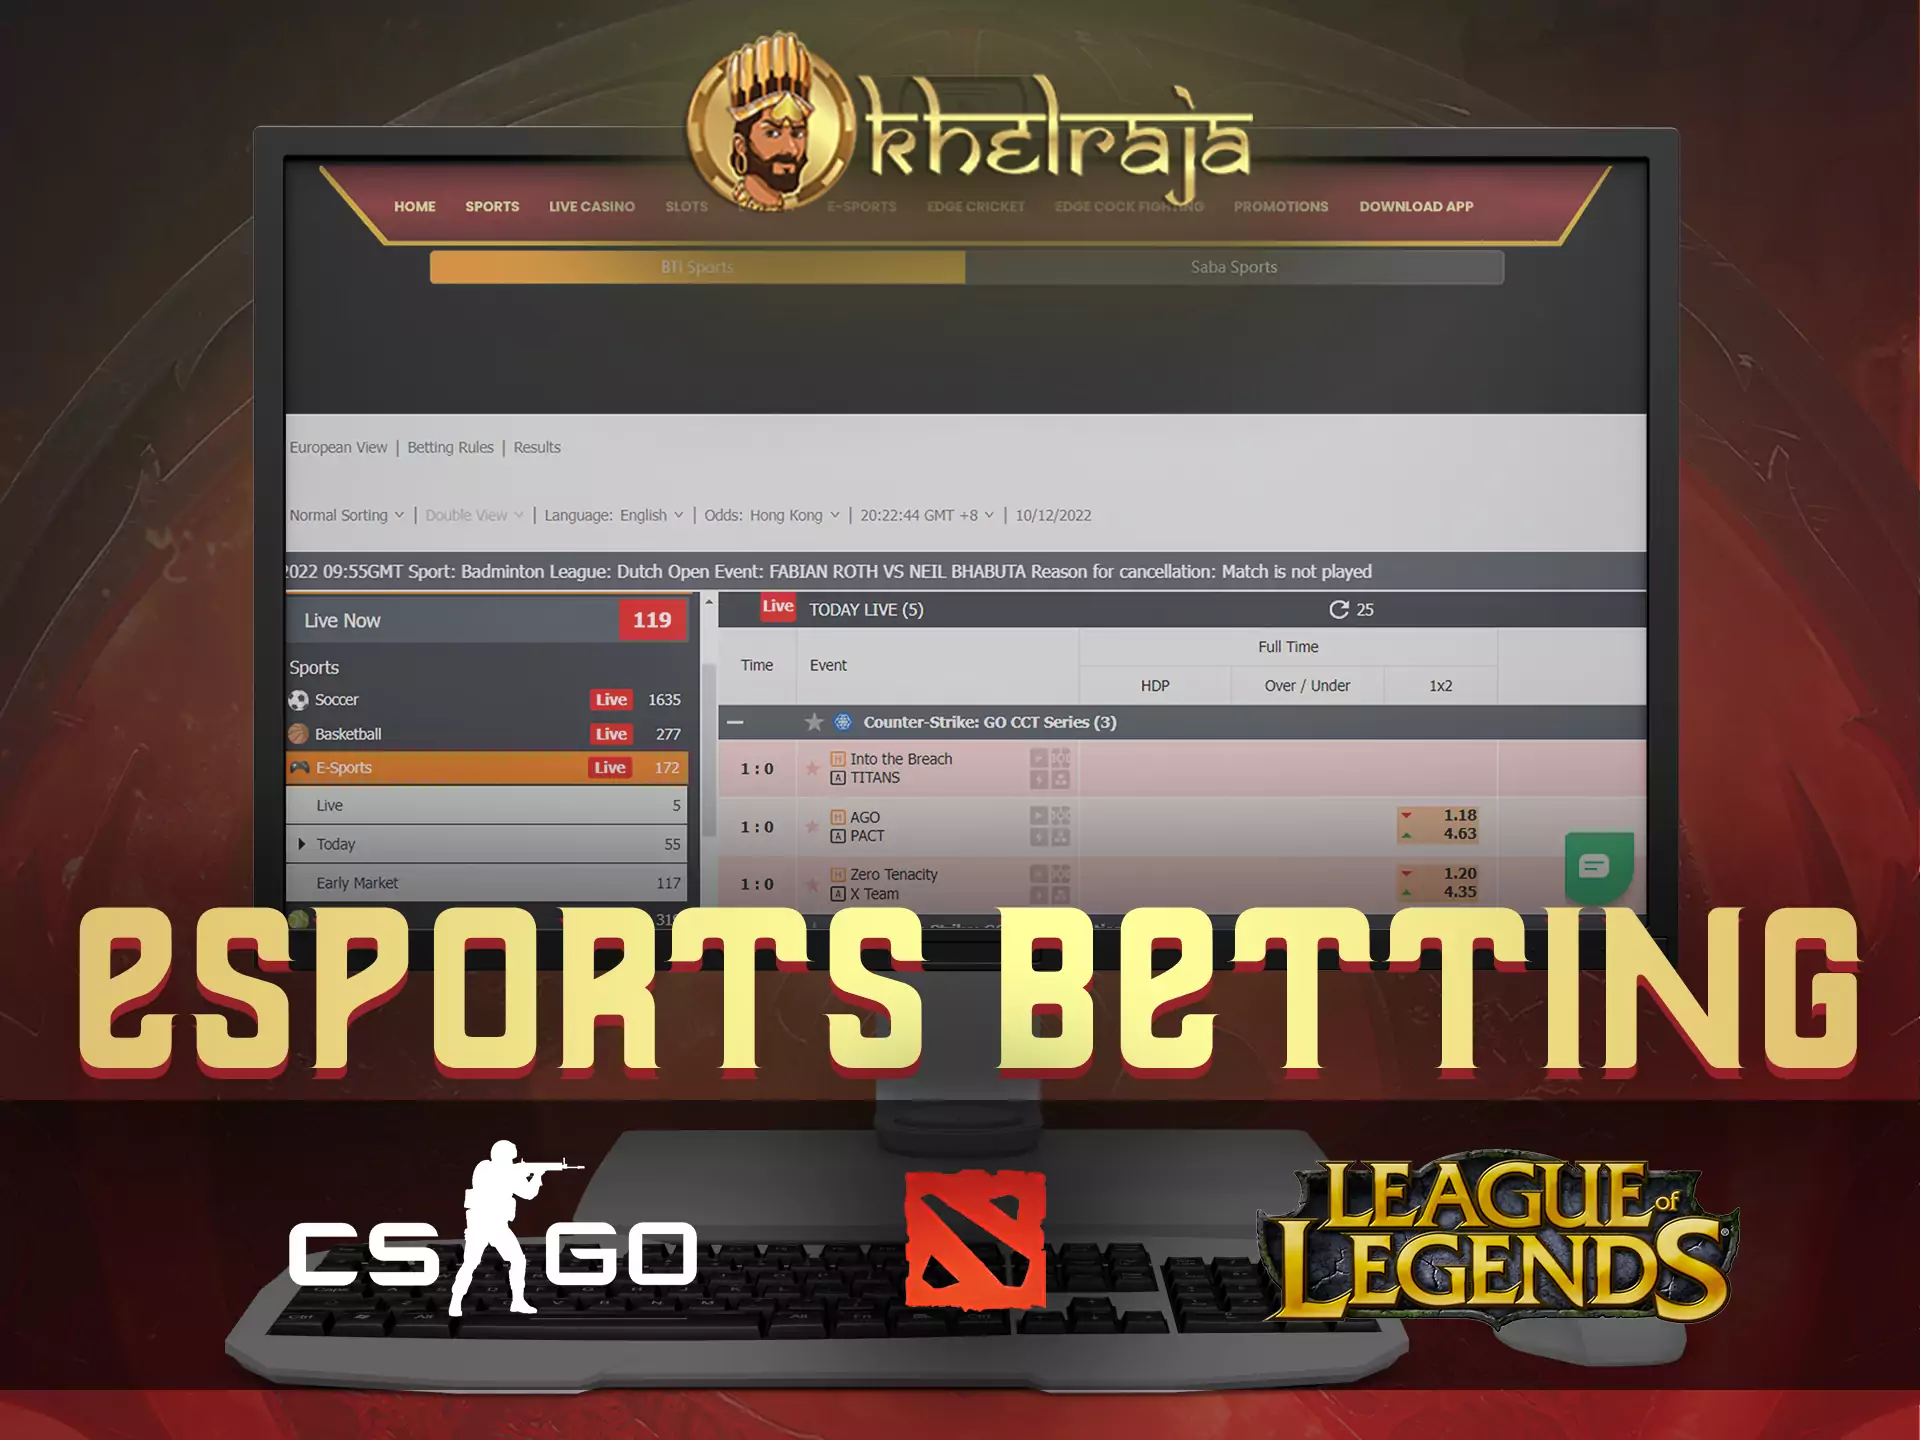 On Khelraja, you can place a bet on an esports event.